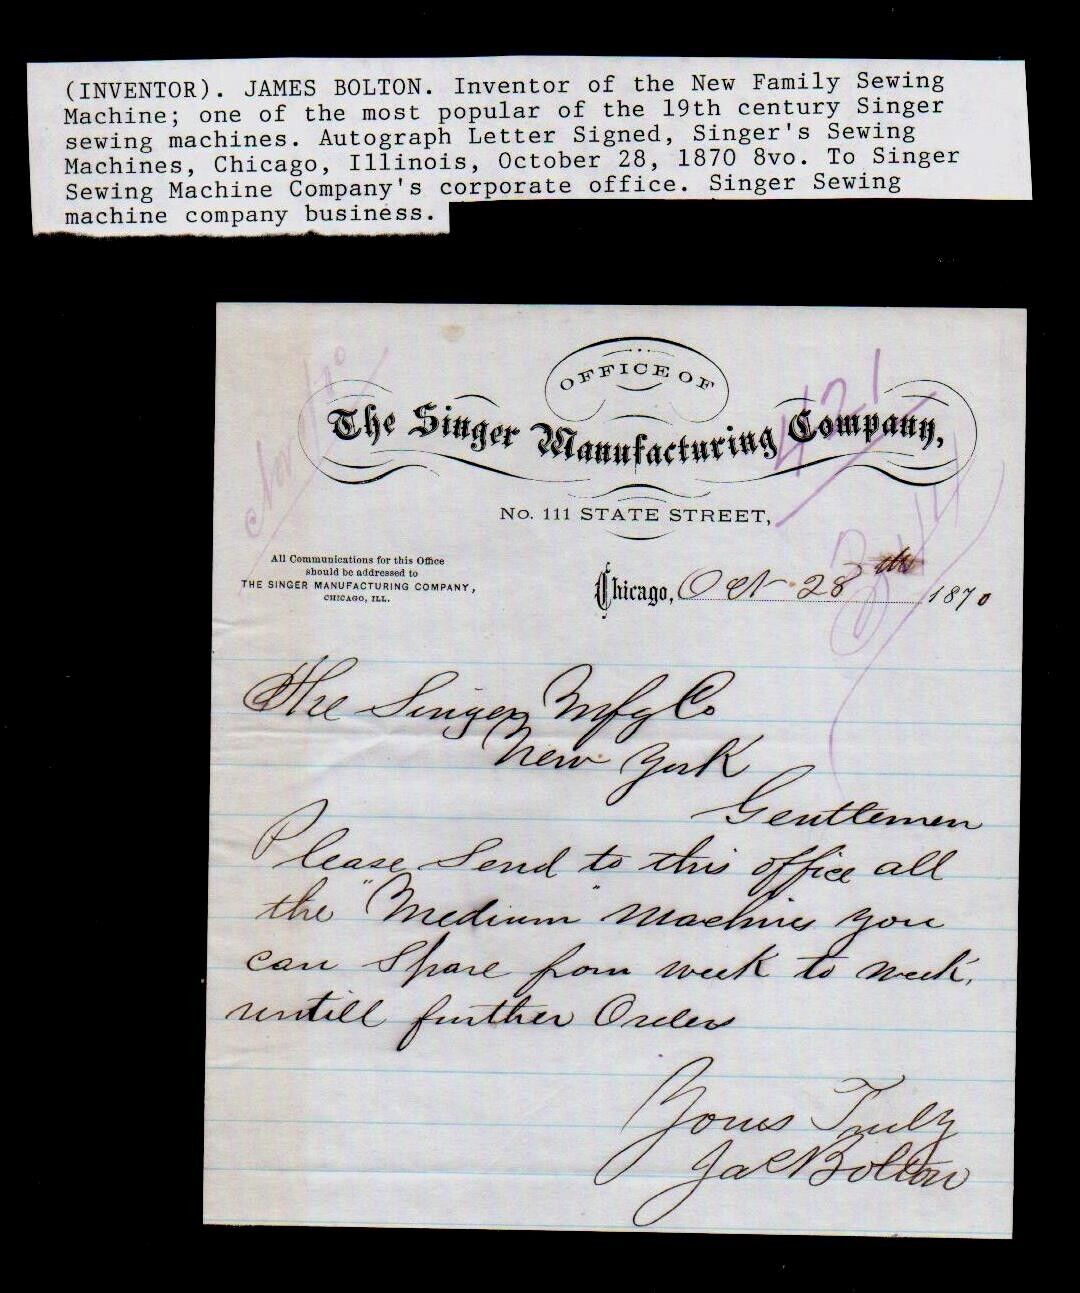 1870 Chicago - James Bolton - Sewing Machine Inventor - signs Singer ALS Letter